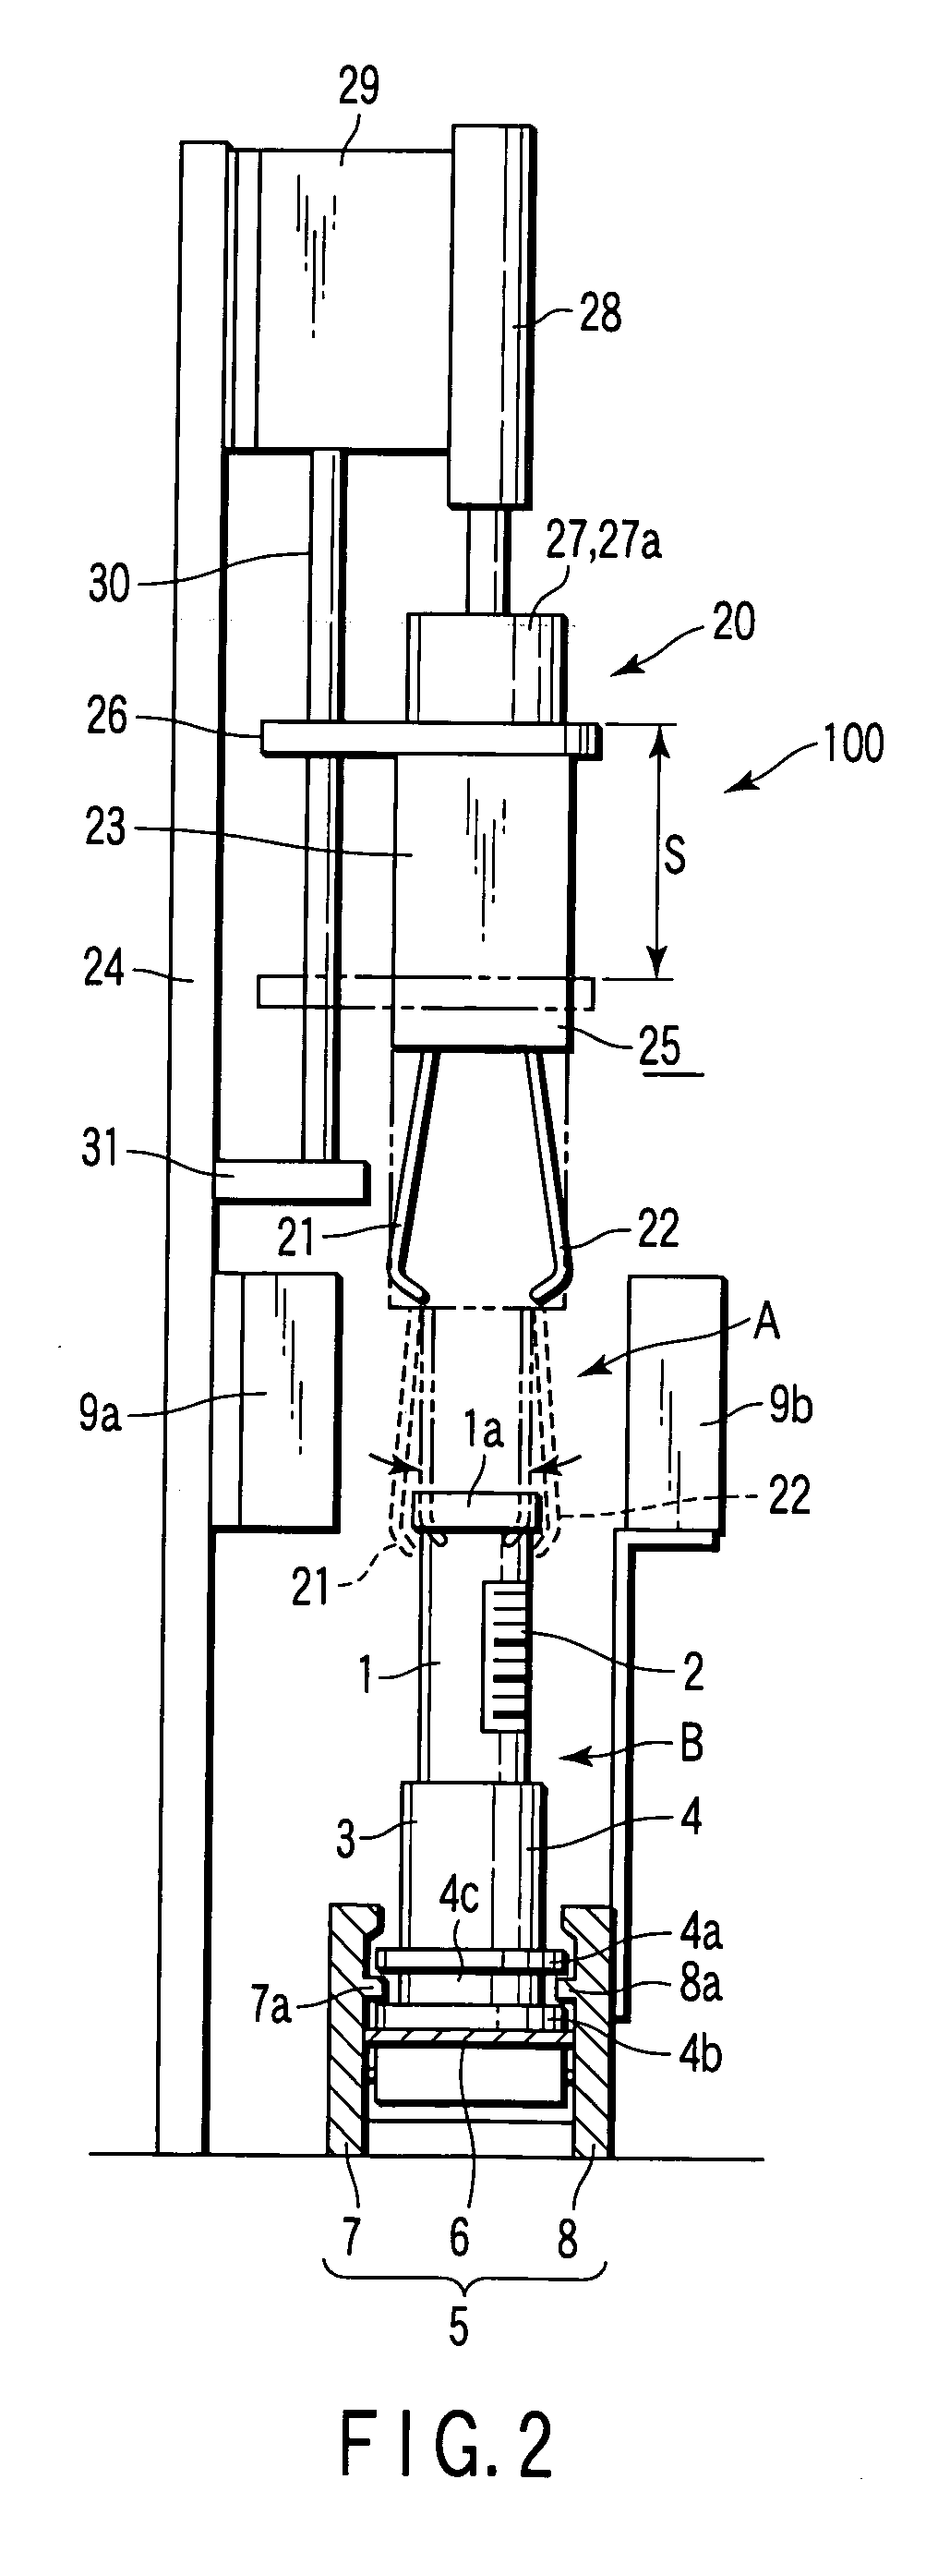 Reading apparatus for bar code on a test tube